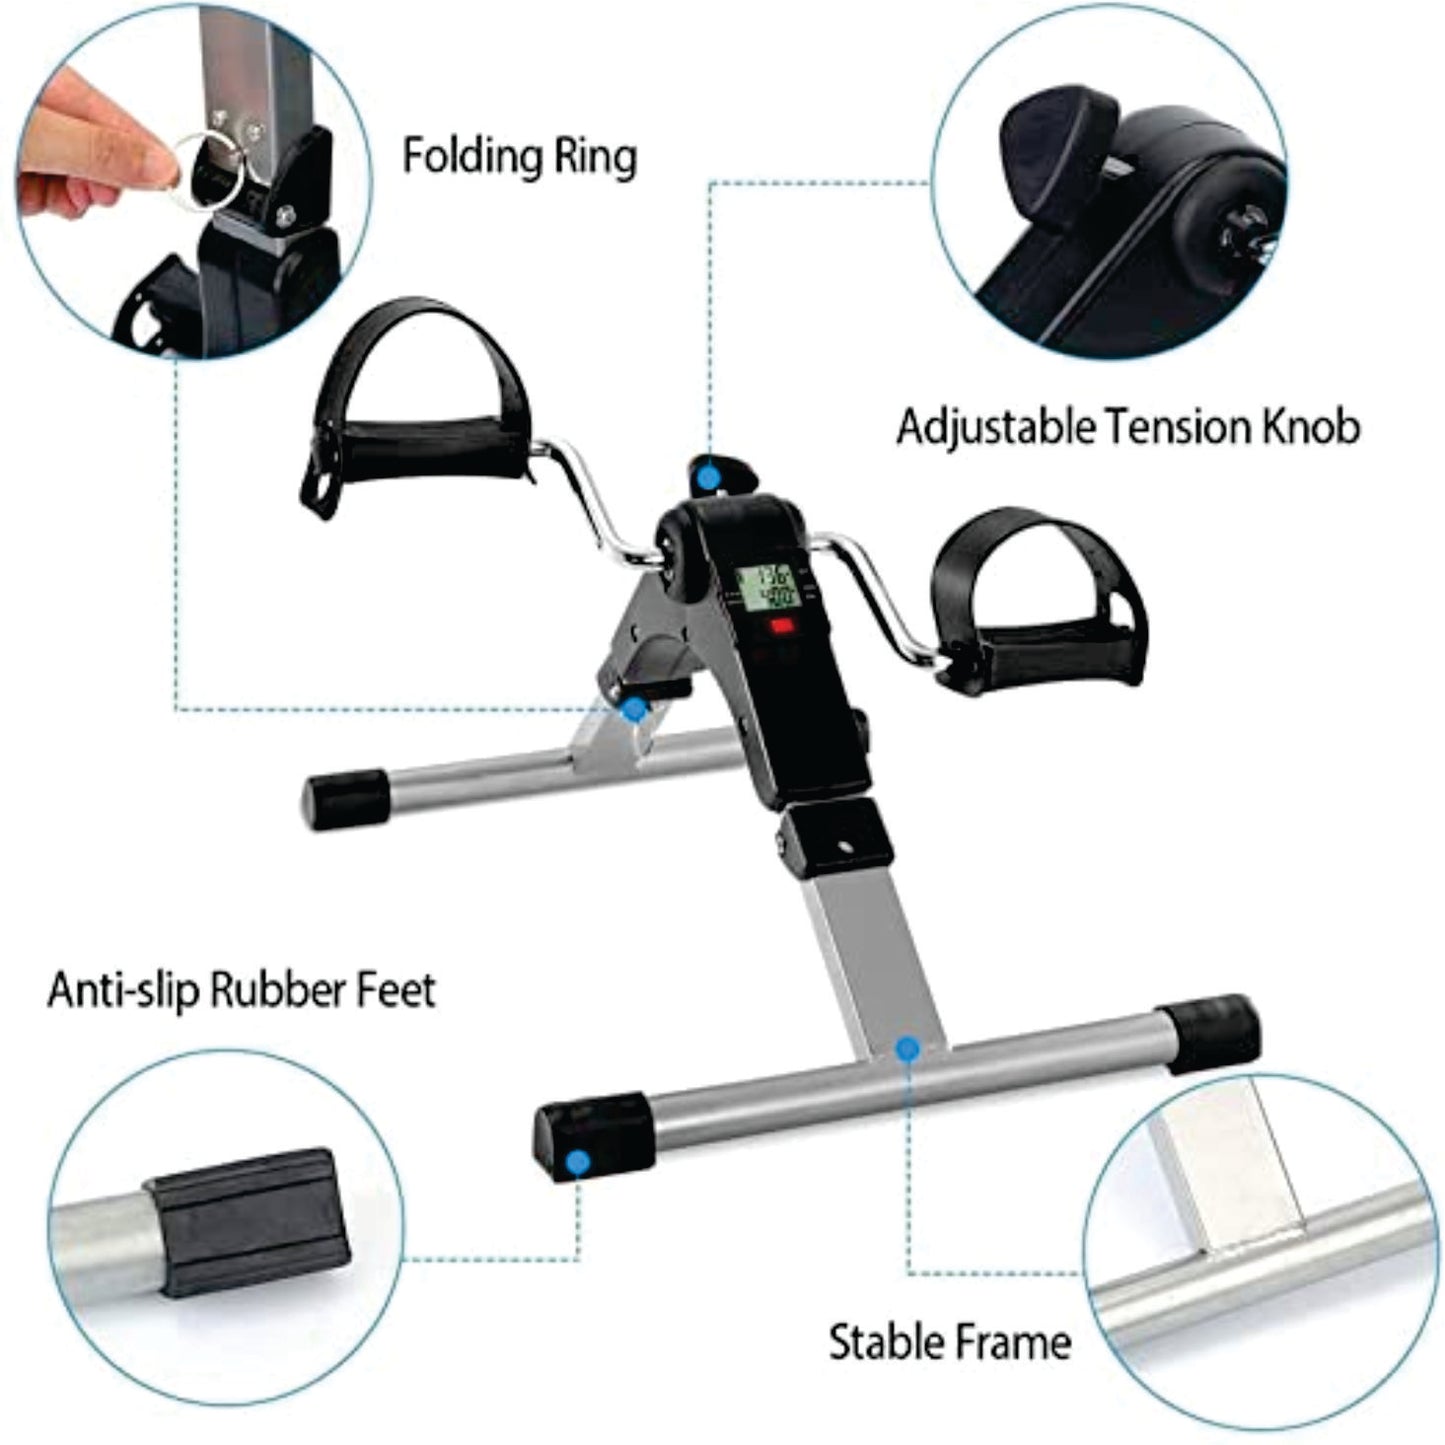 EXERCISE CYCLE FOLDABLE 4521